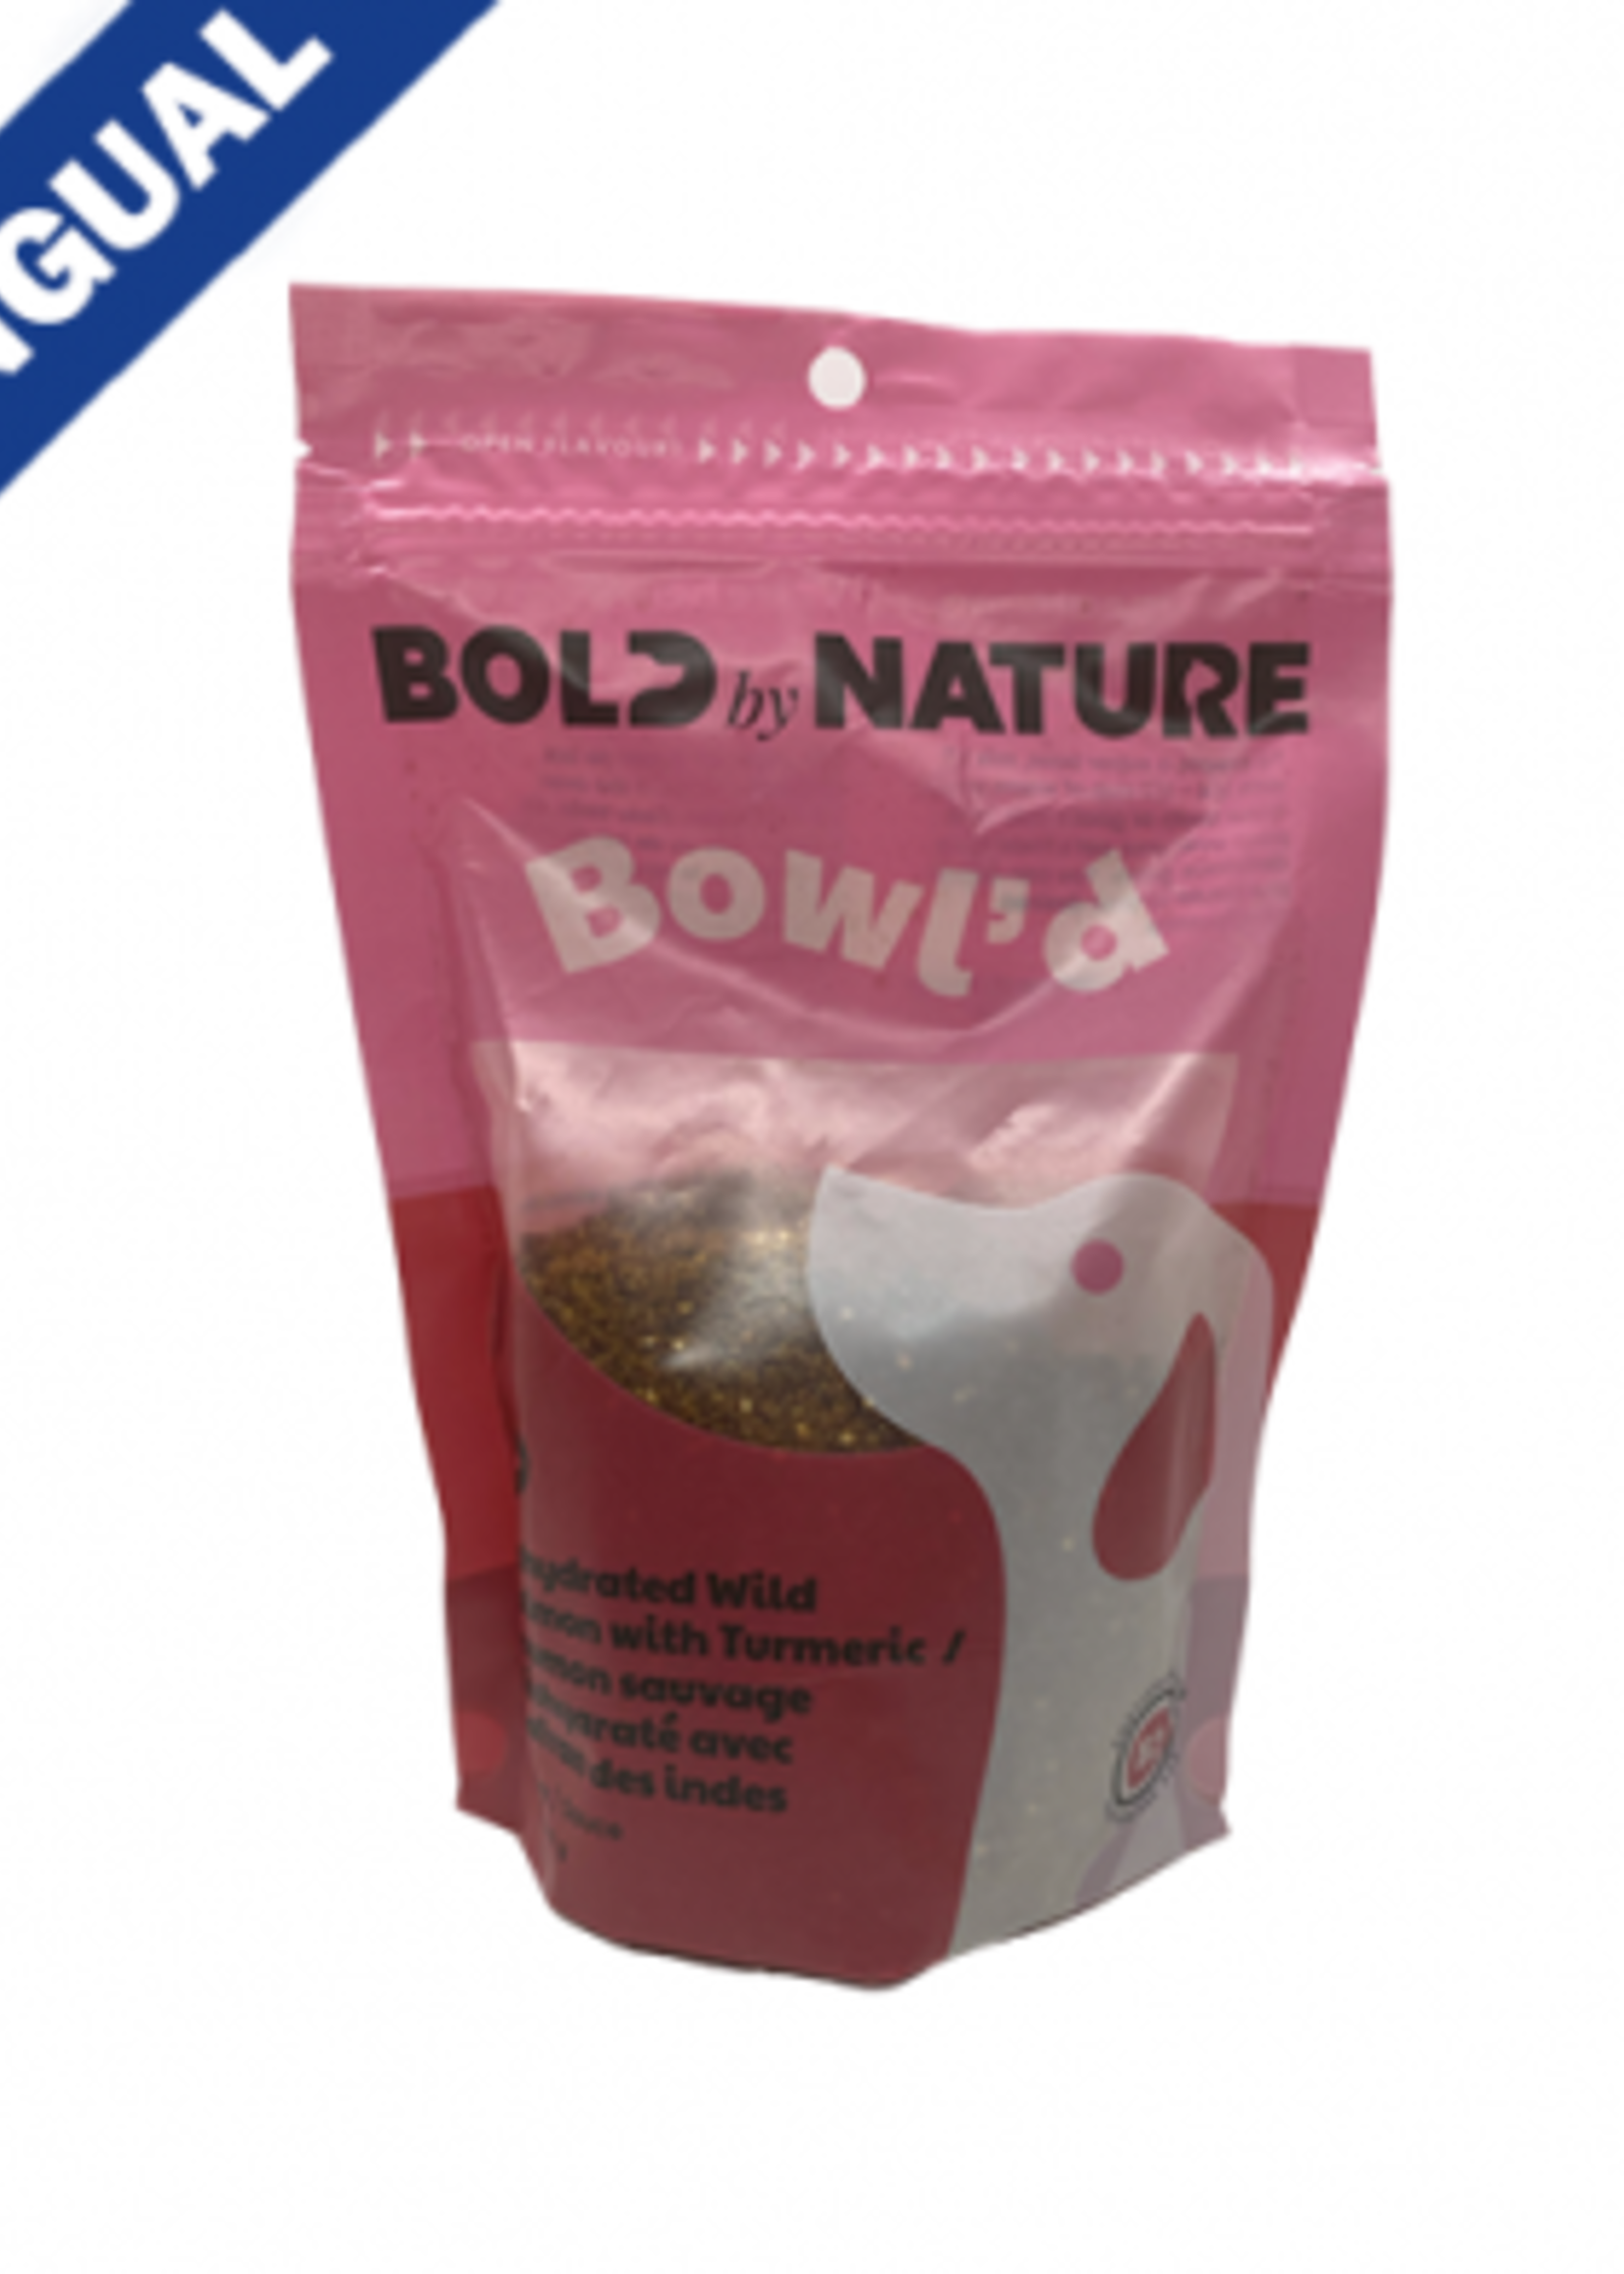 BOLD by Nature Bowl'd Salmon with tumeric gravy 14oz